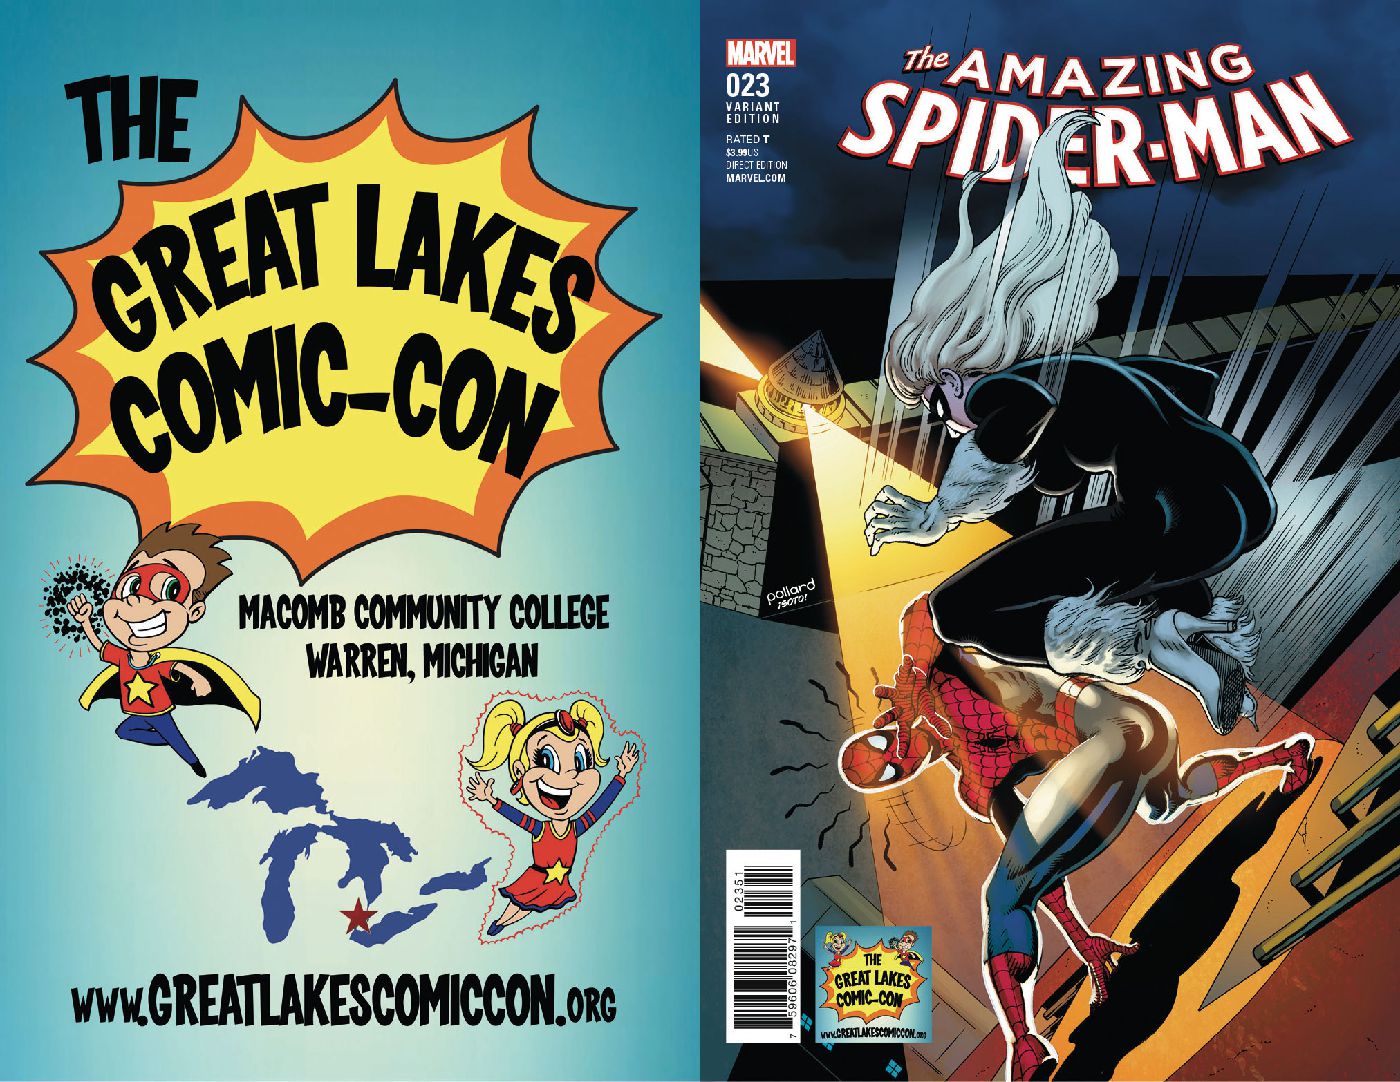 THE GREAT LAKES COMIC-CON VARIANT COVER